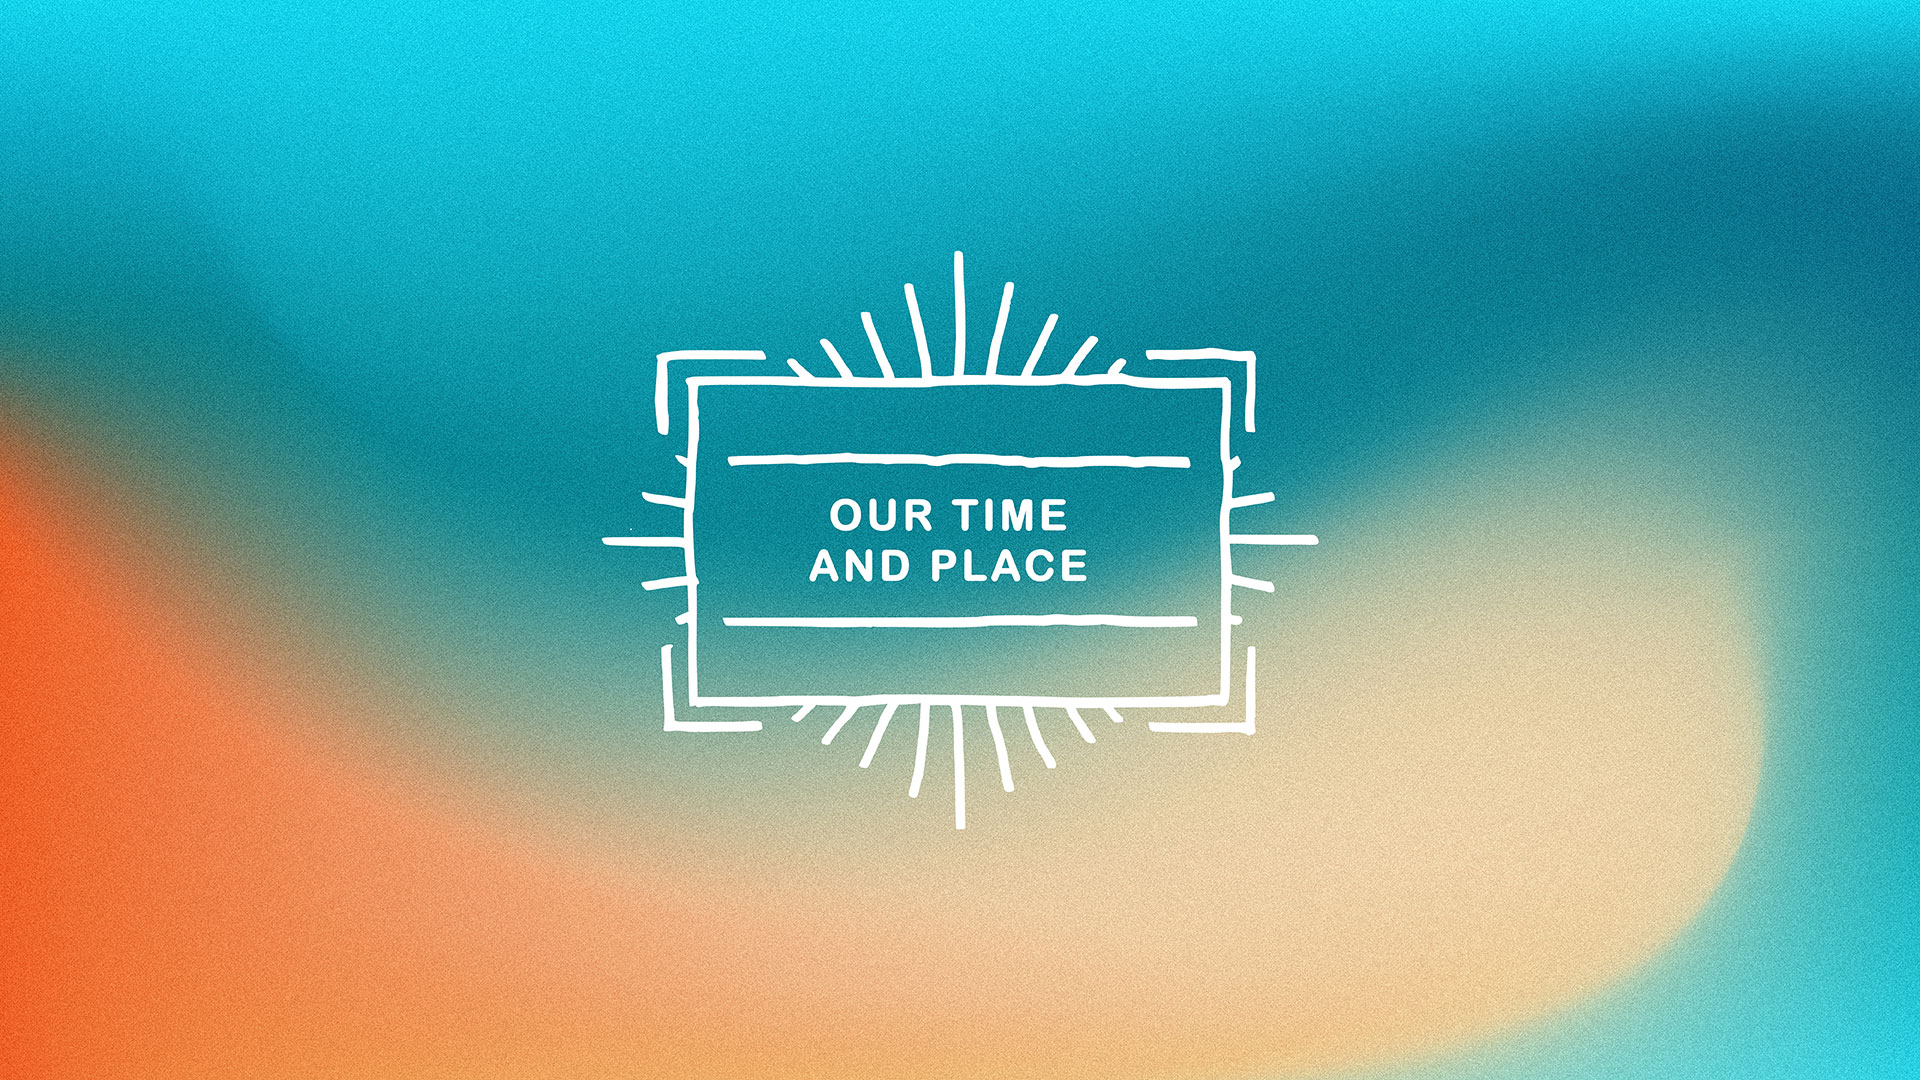 Series: Our Time And Place